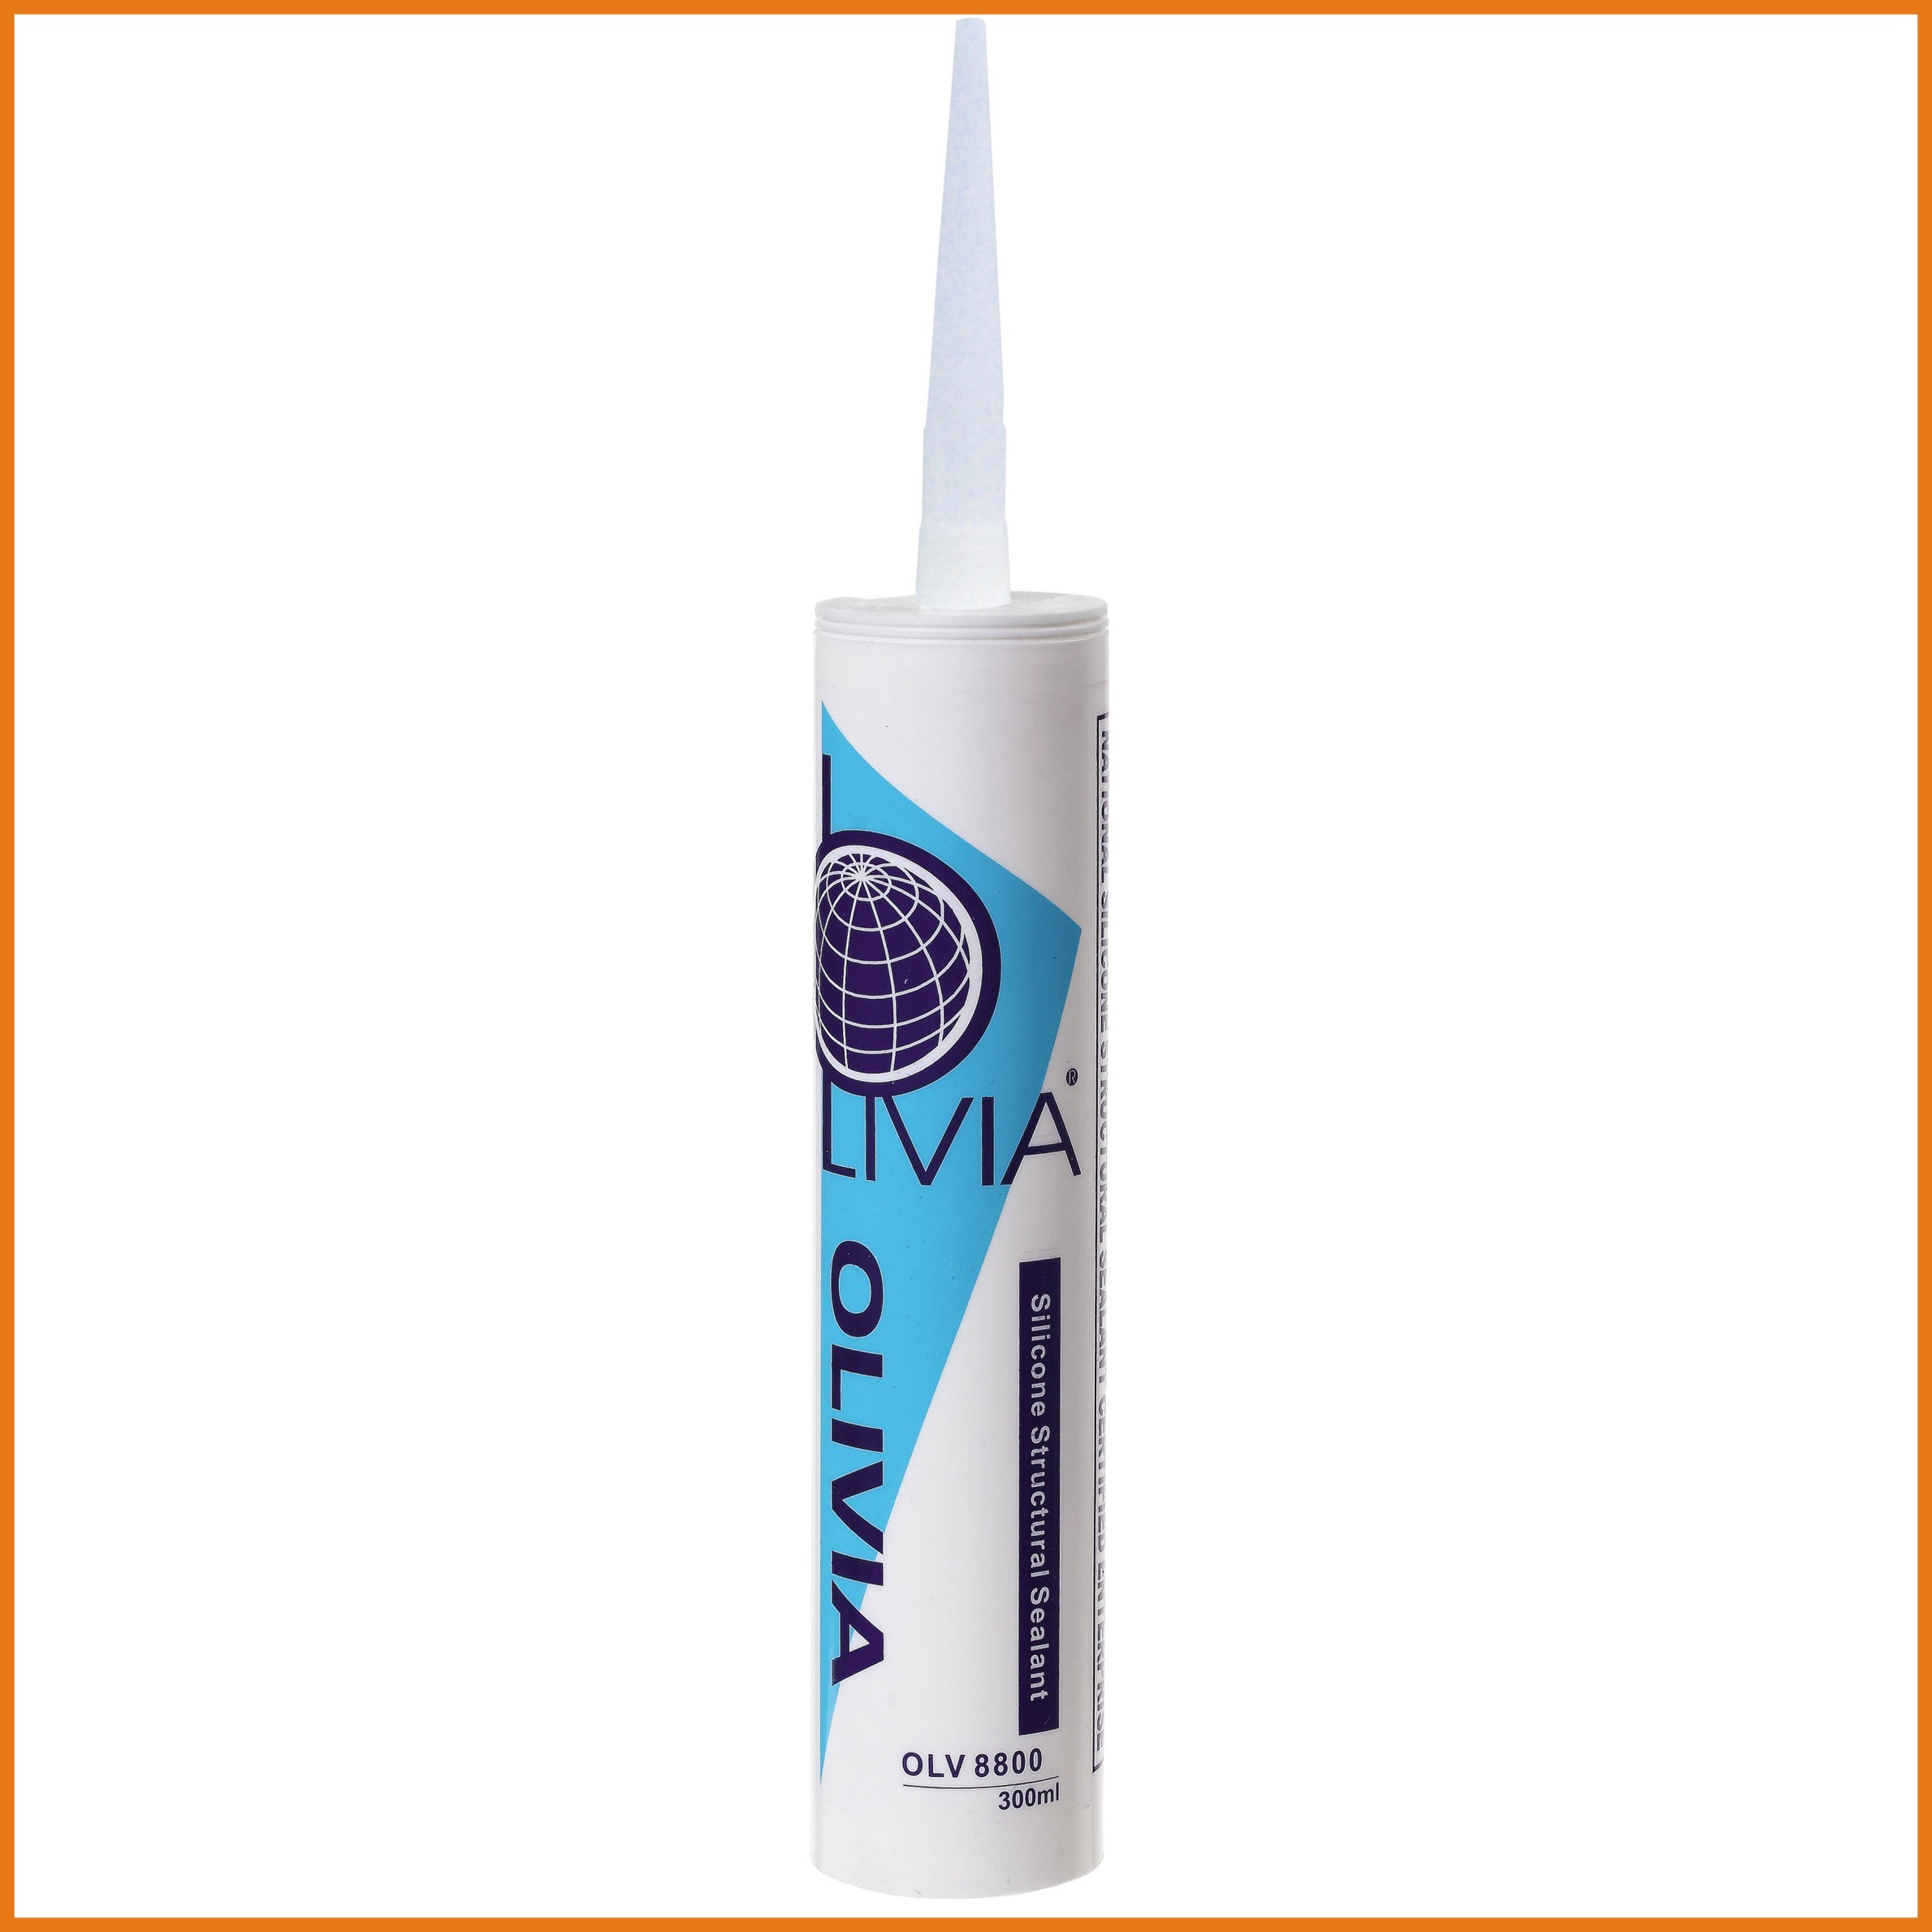 Super Performance Neutral Structural Silicone Sealant